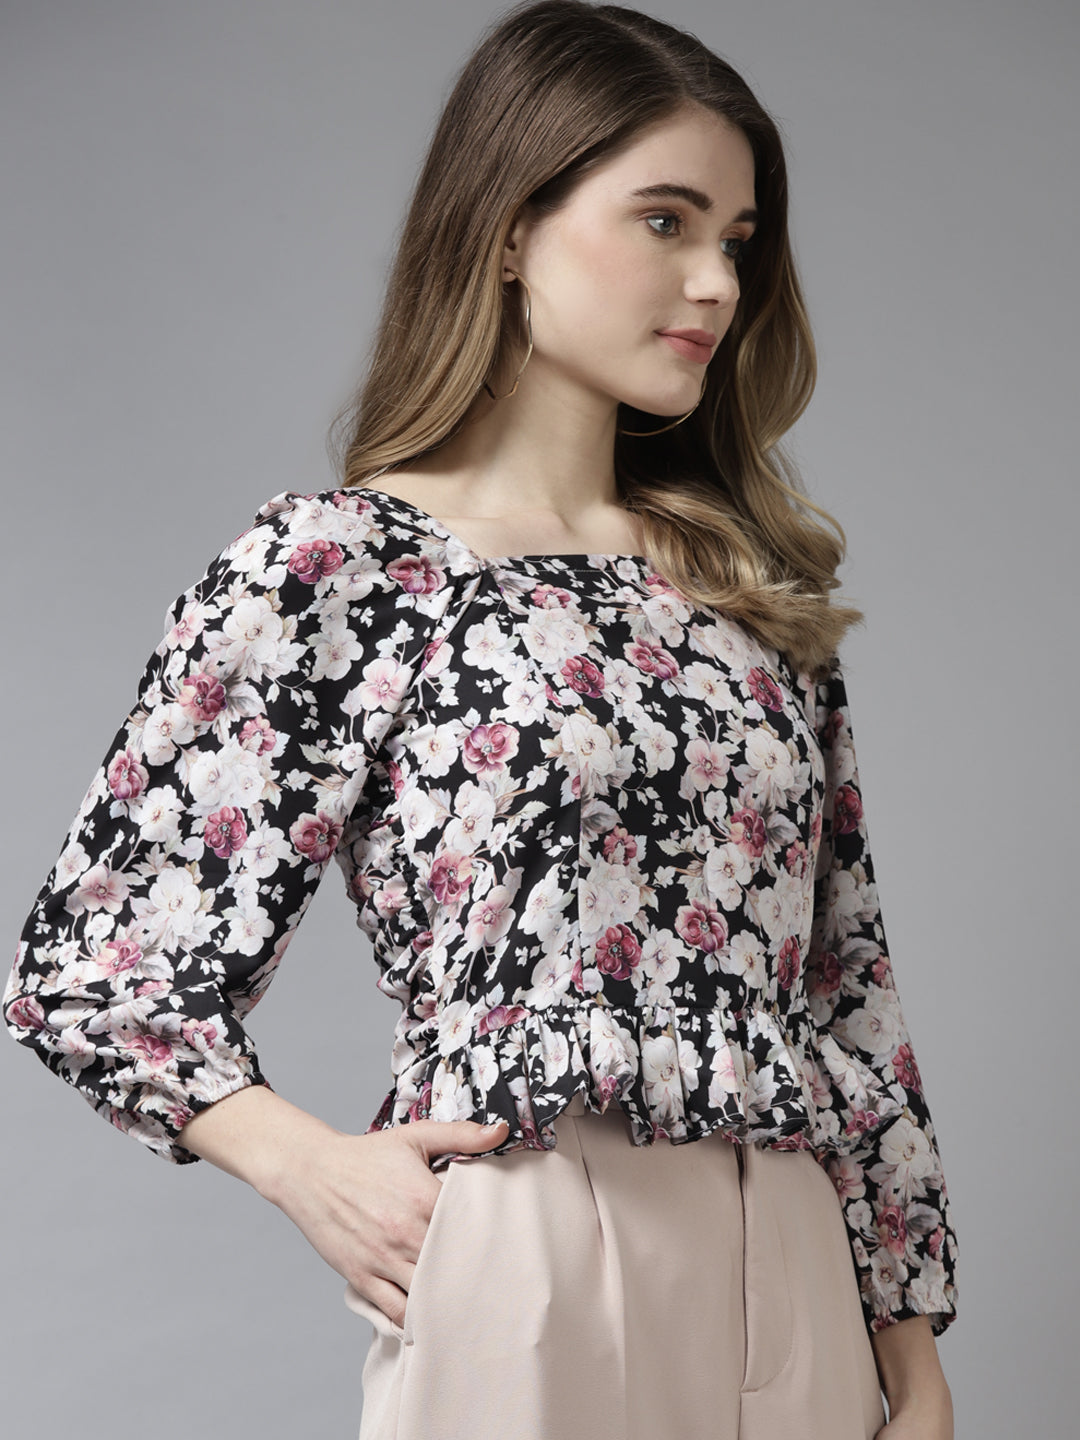 Bhama Couture Black & White Floral Printed Smocked A-Line Top